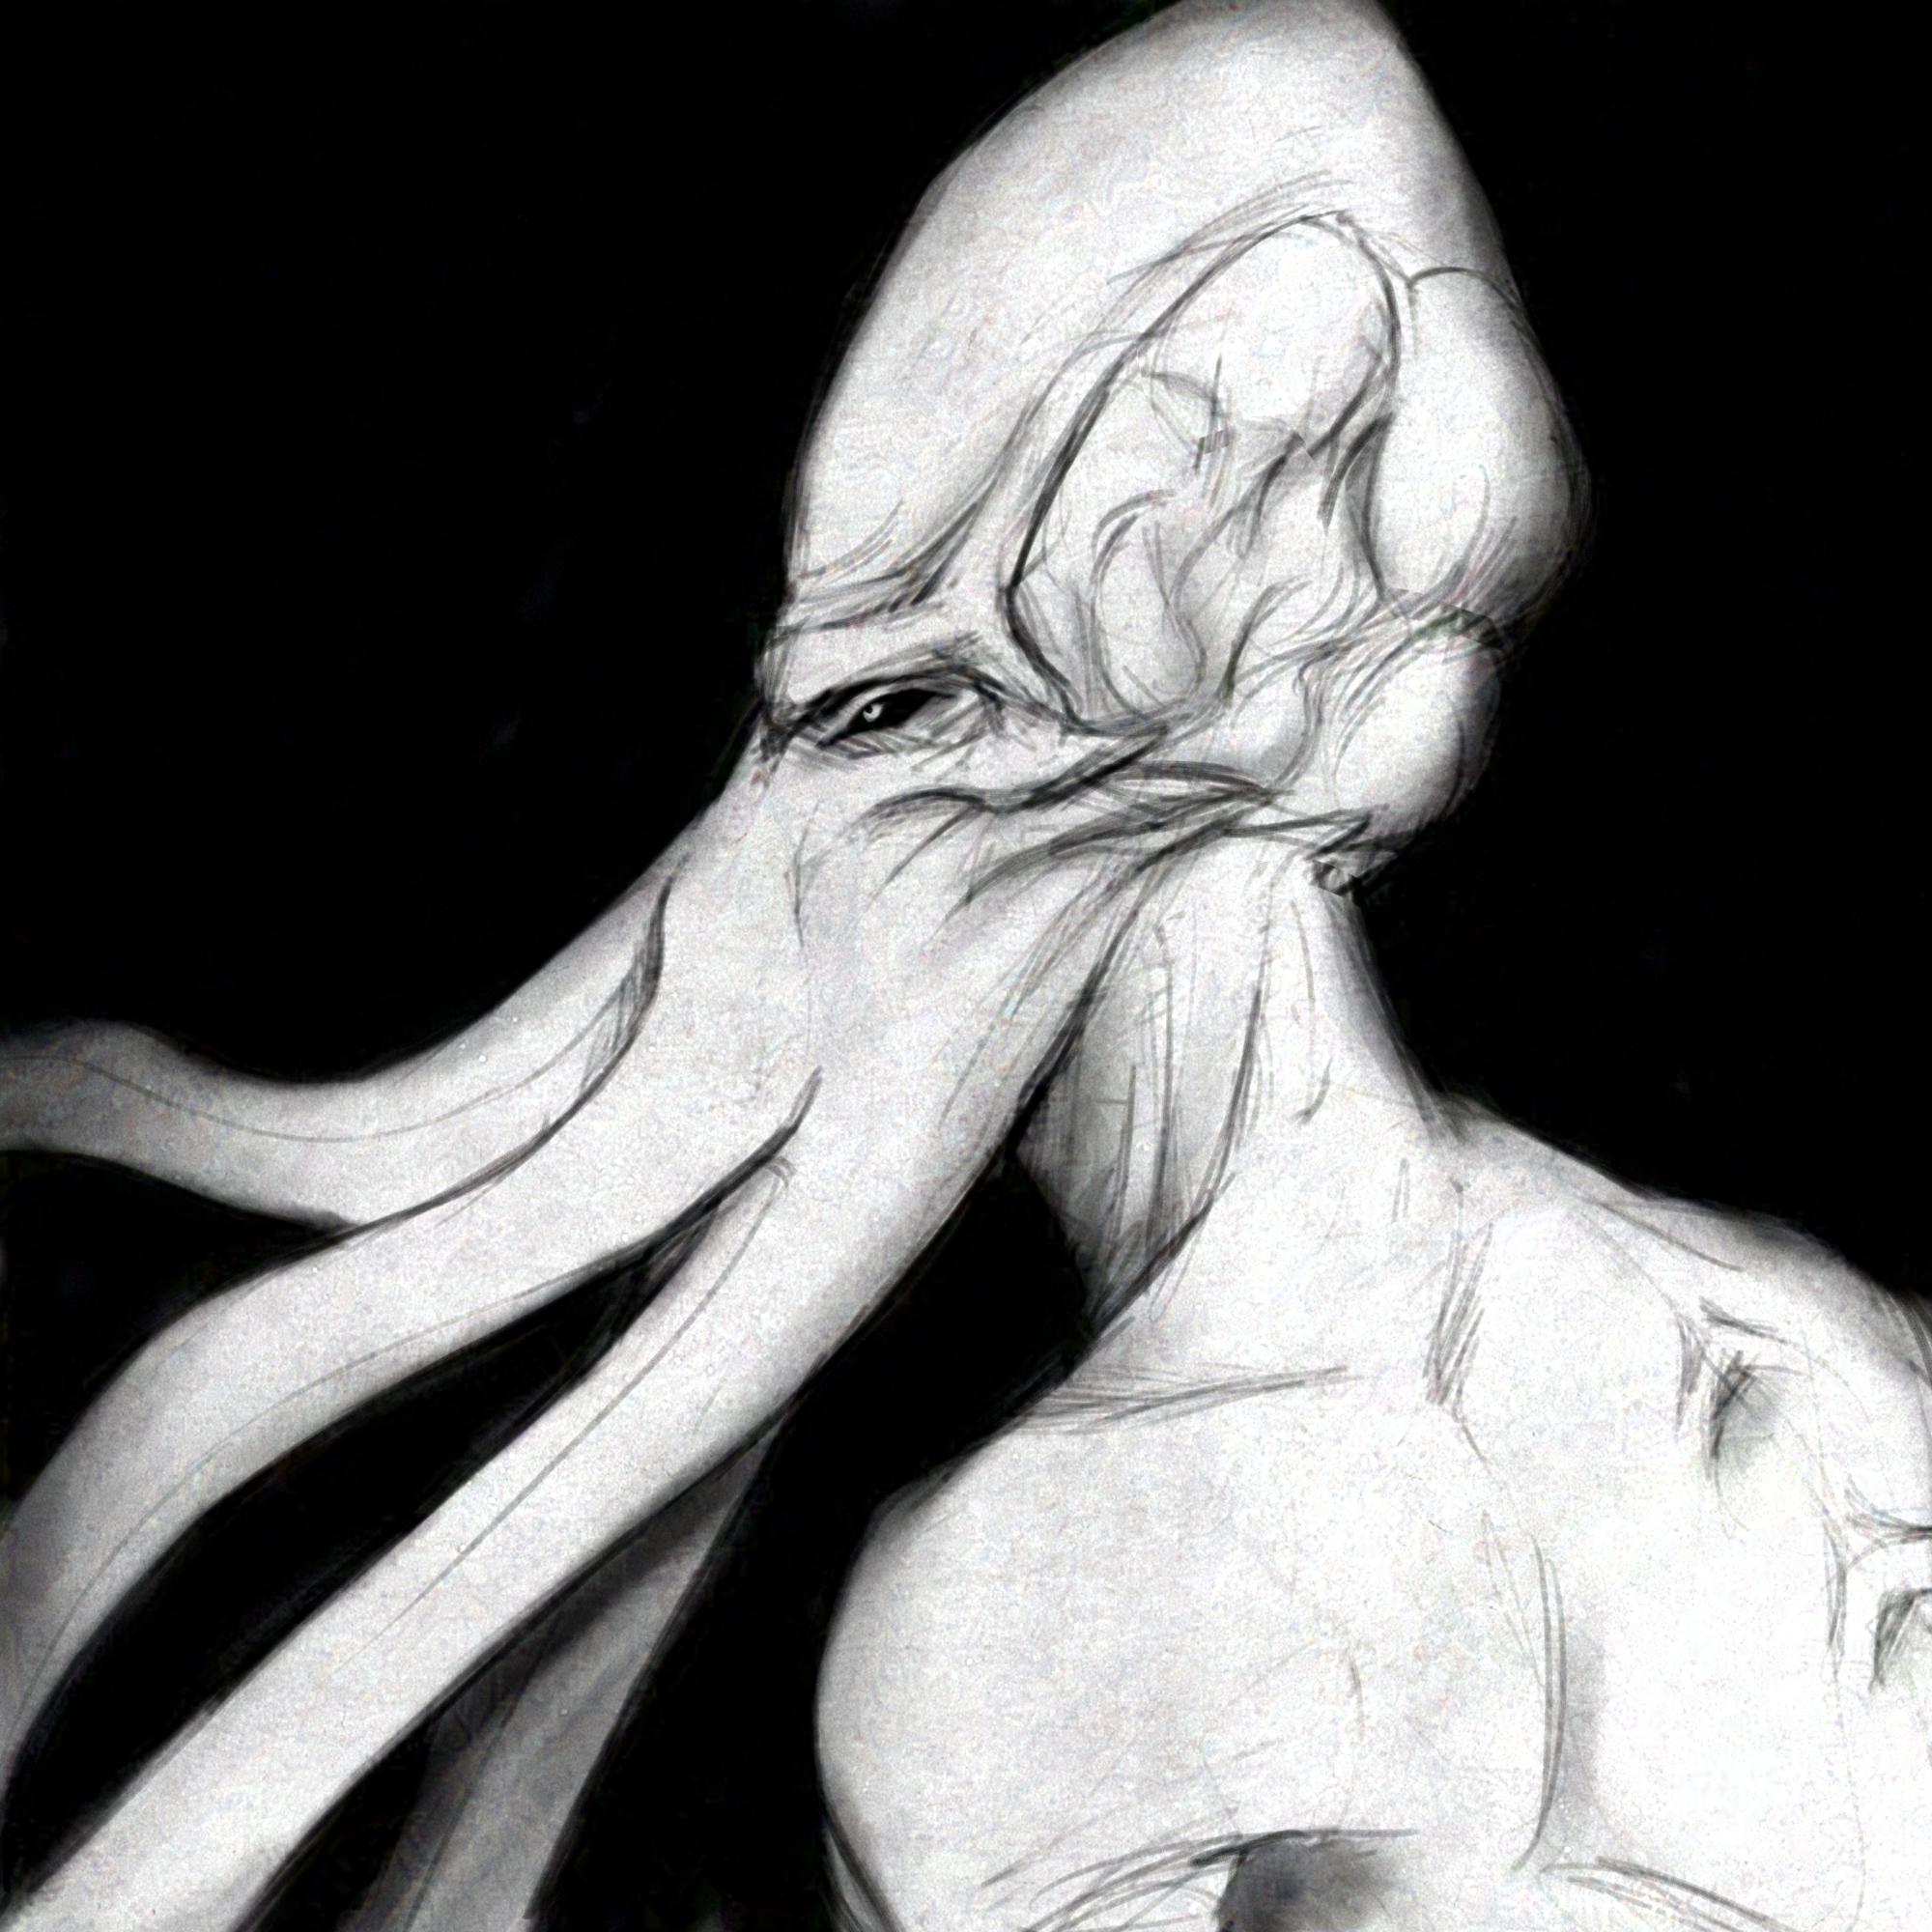 The second image of a five panel series. A side view of the Emperor (an illithid) against a completely dark background and shrouded in darkness. It's looking up slightly, presumably at the covered sun.